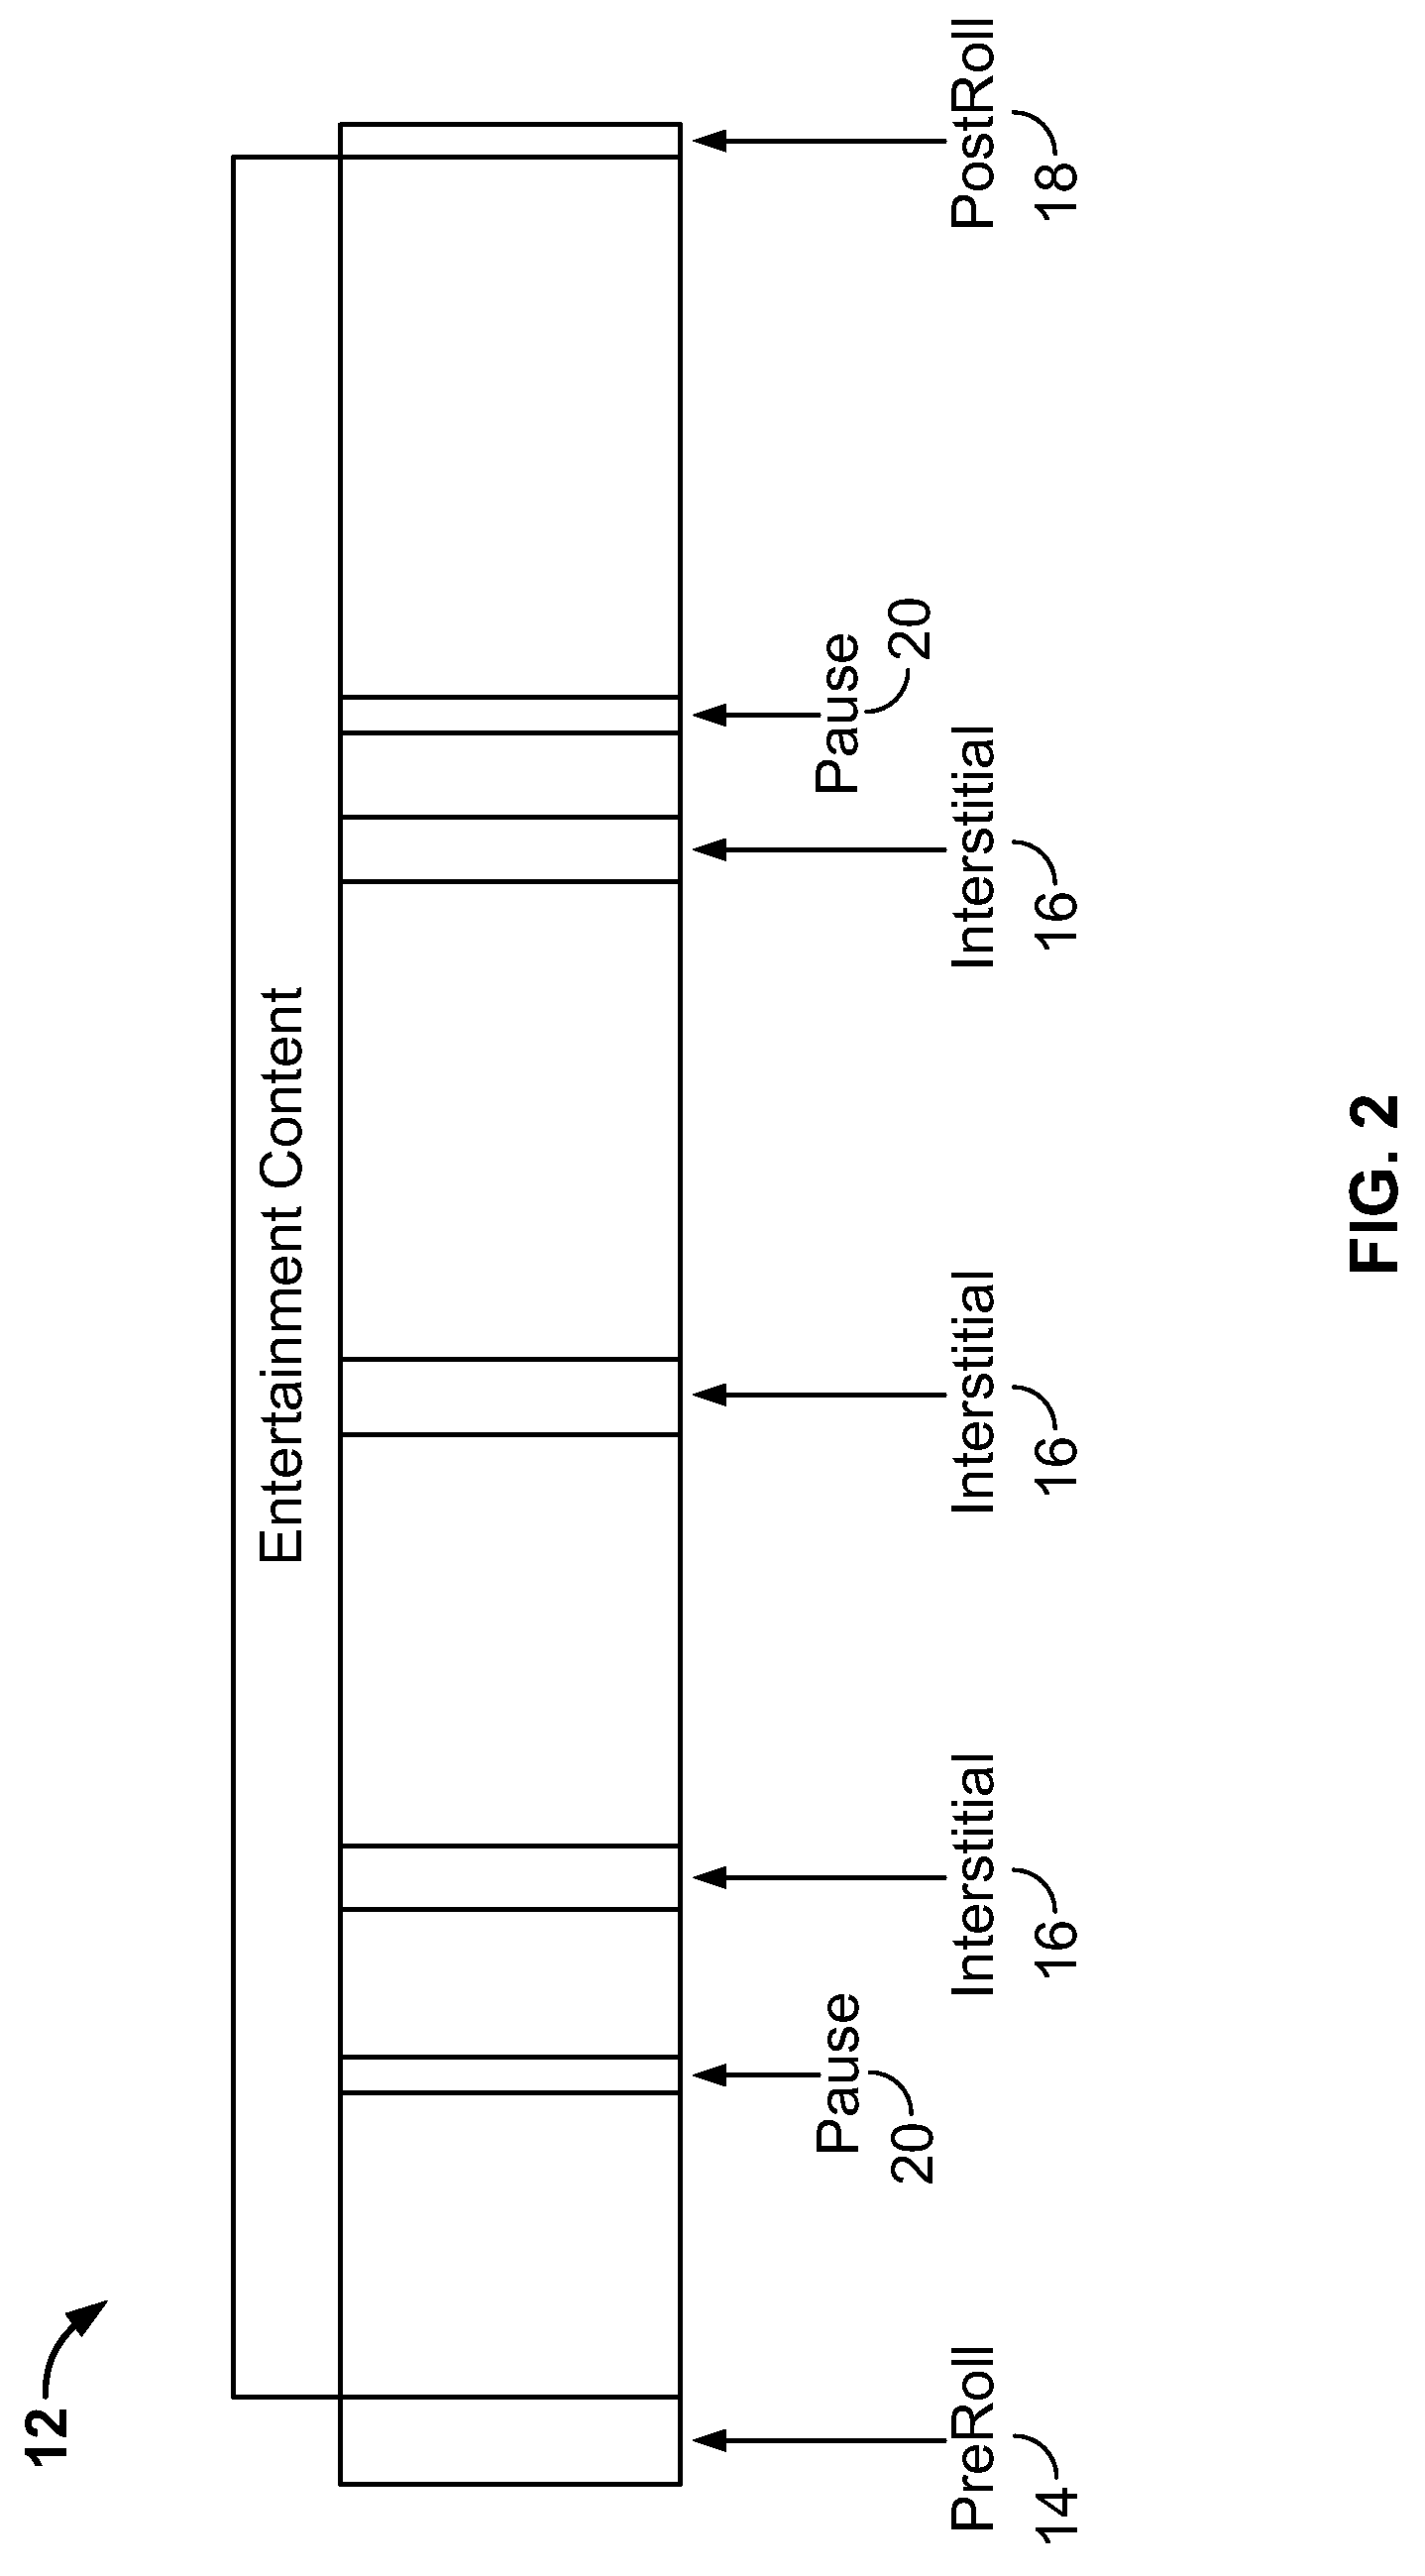 System and method for enabling content providers to identify advertising opportunities